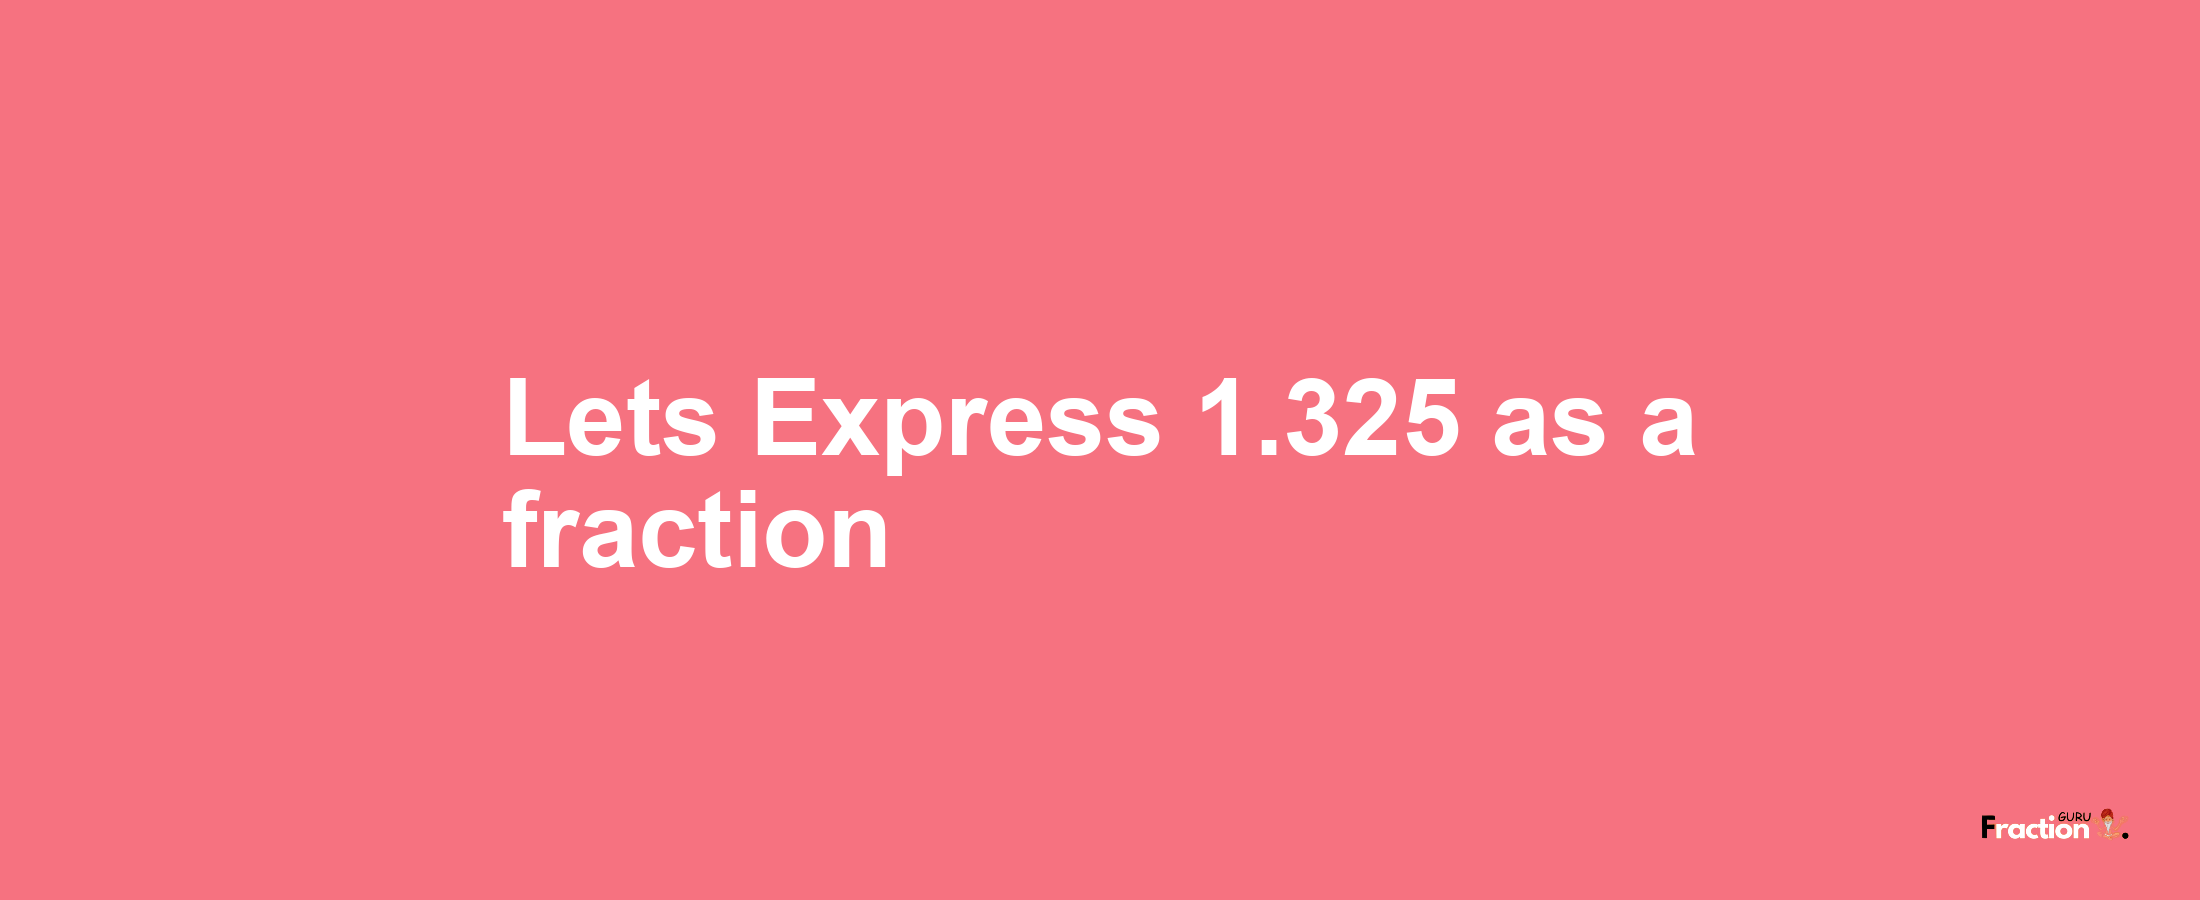 Lets Express 1.325 as afraction